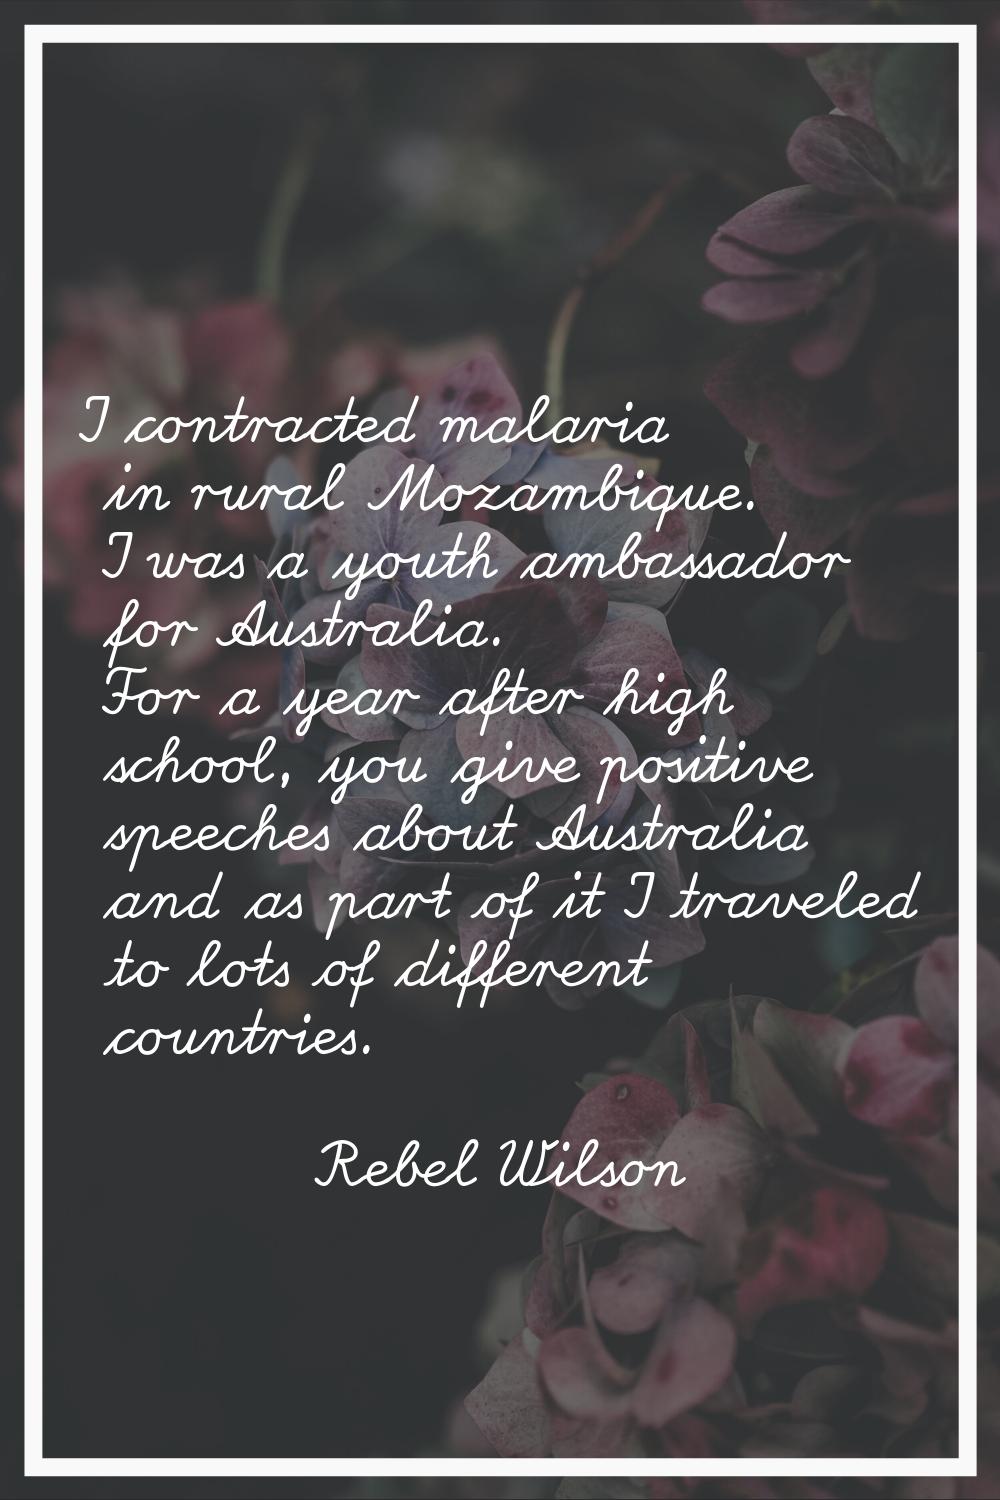 I contracted malaria in rural Mozambique. I was a youth ambassador for Australia. For a year after 